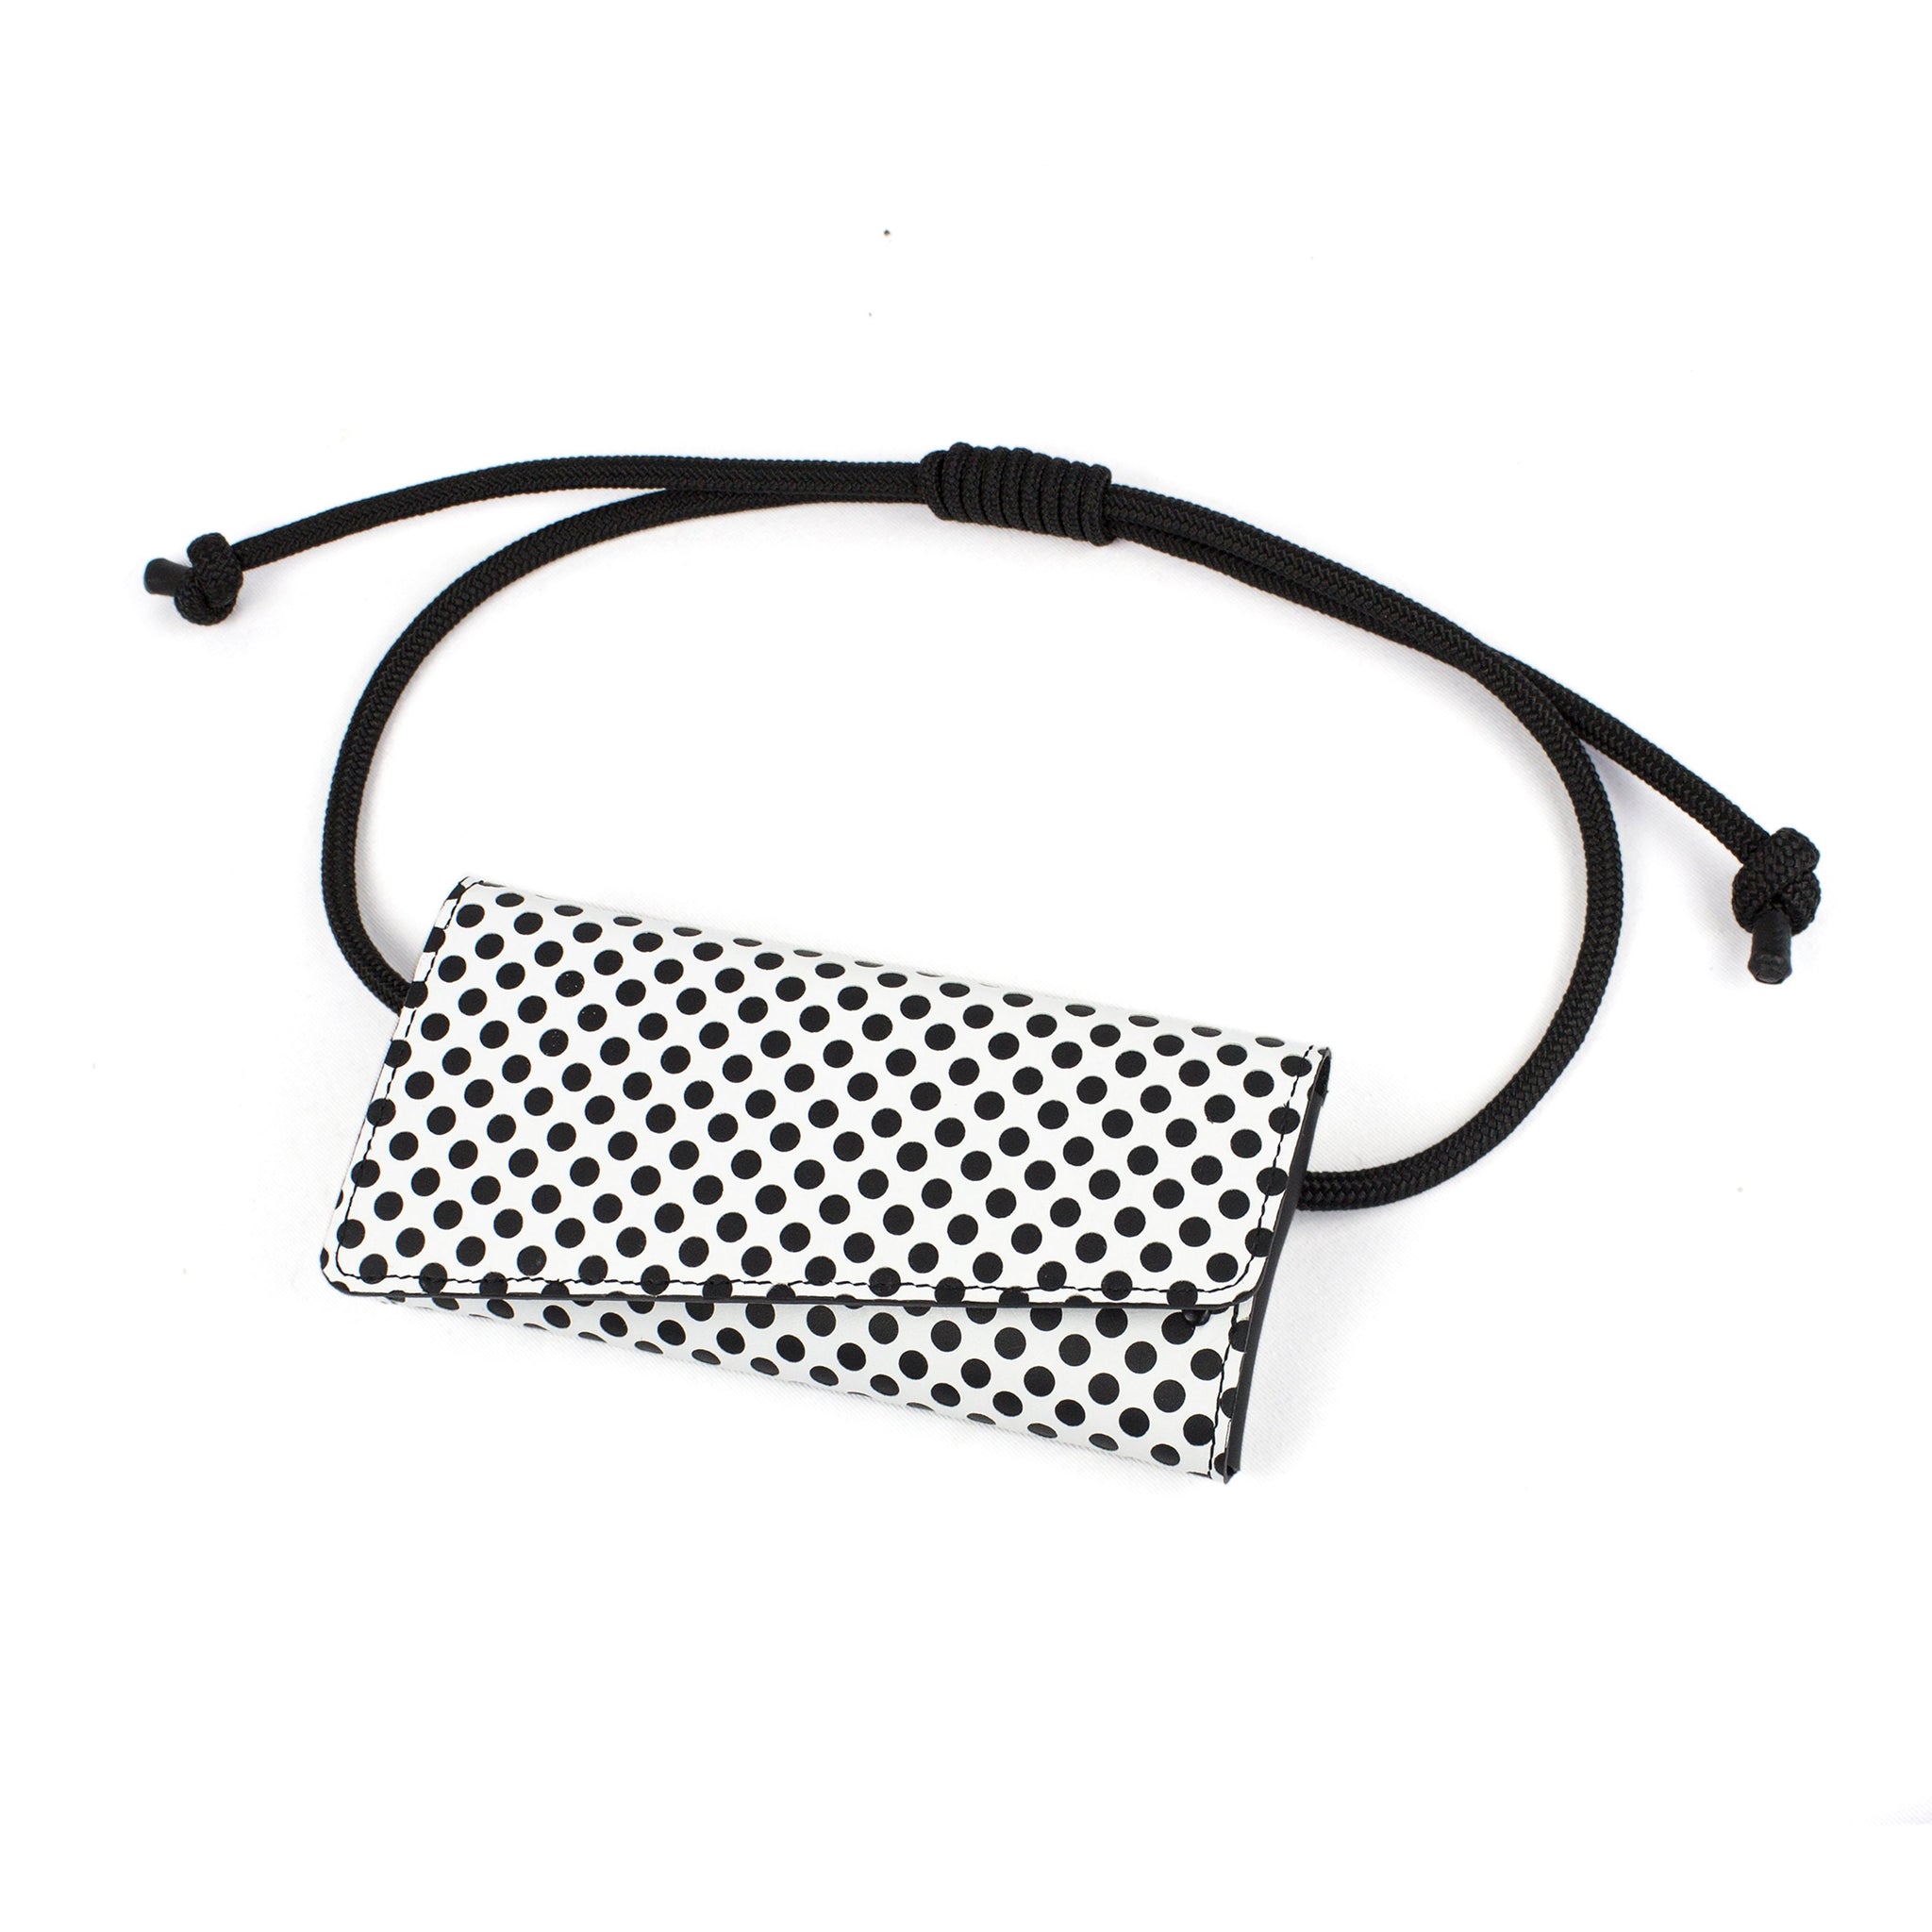 Perforated genuine leather mesh festival / waist bag-Bags_And_Purses, black and white, black_and_white, bum_bag, crossbody, designer, festival, geometric, leather crossbody, mesh, minimal, perforated, rope, small leather bag, unique, waist_bag-Mimikri